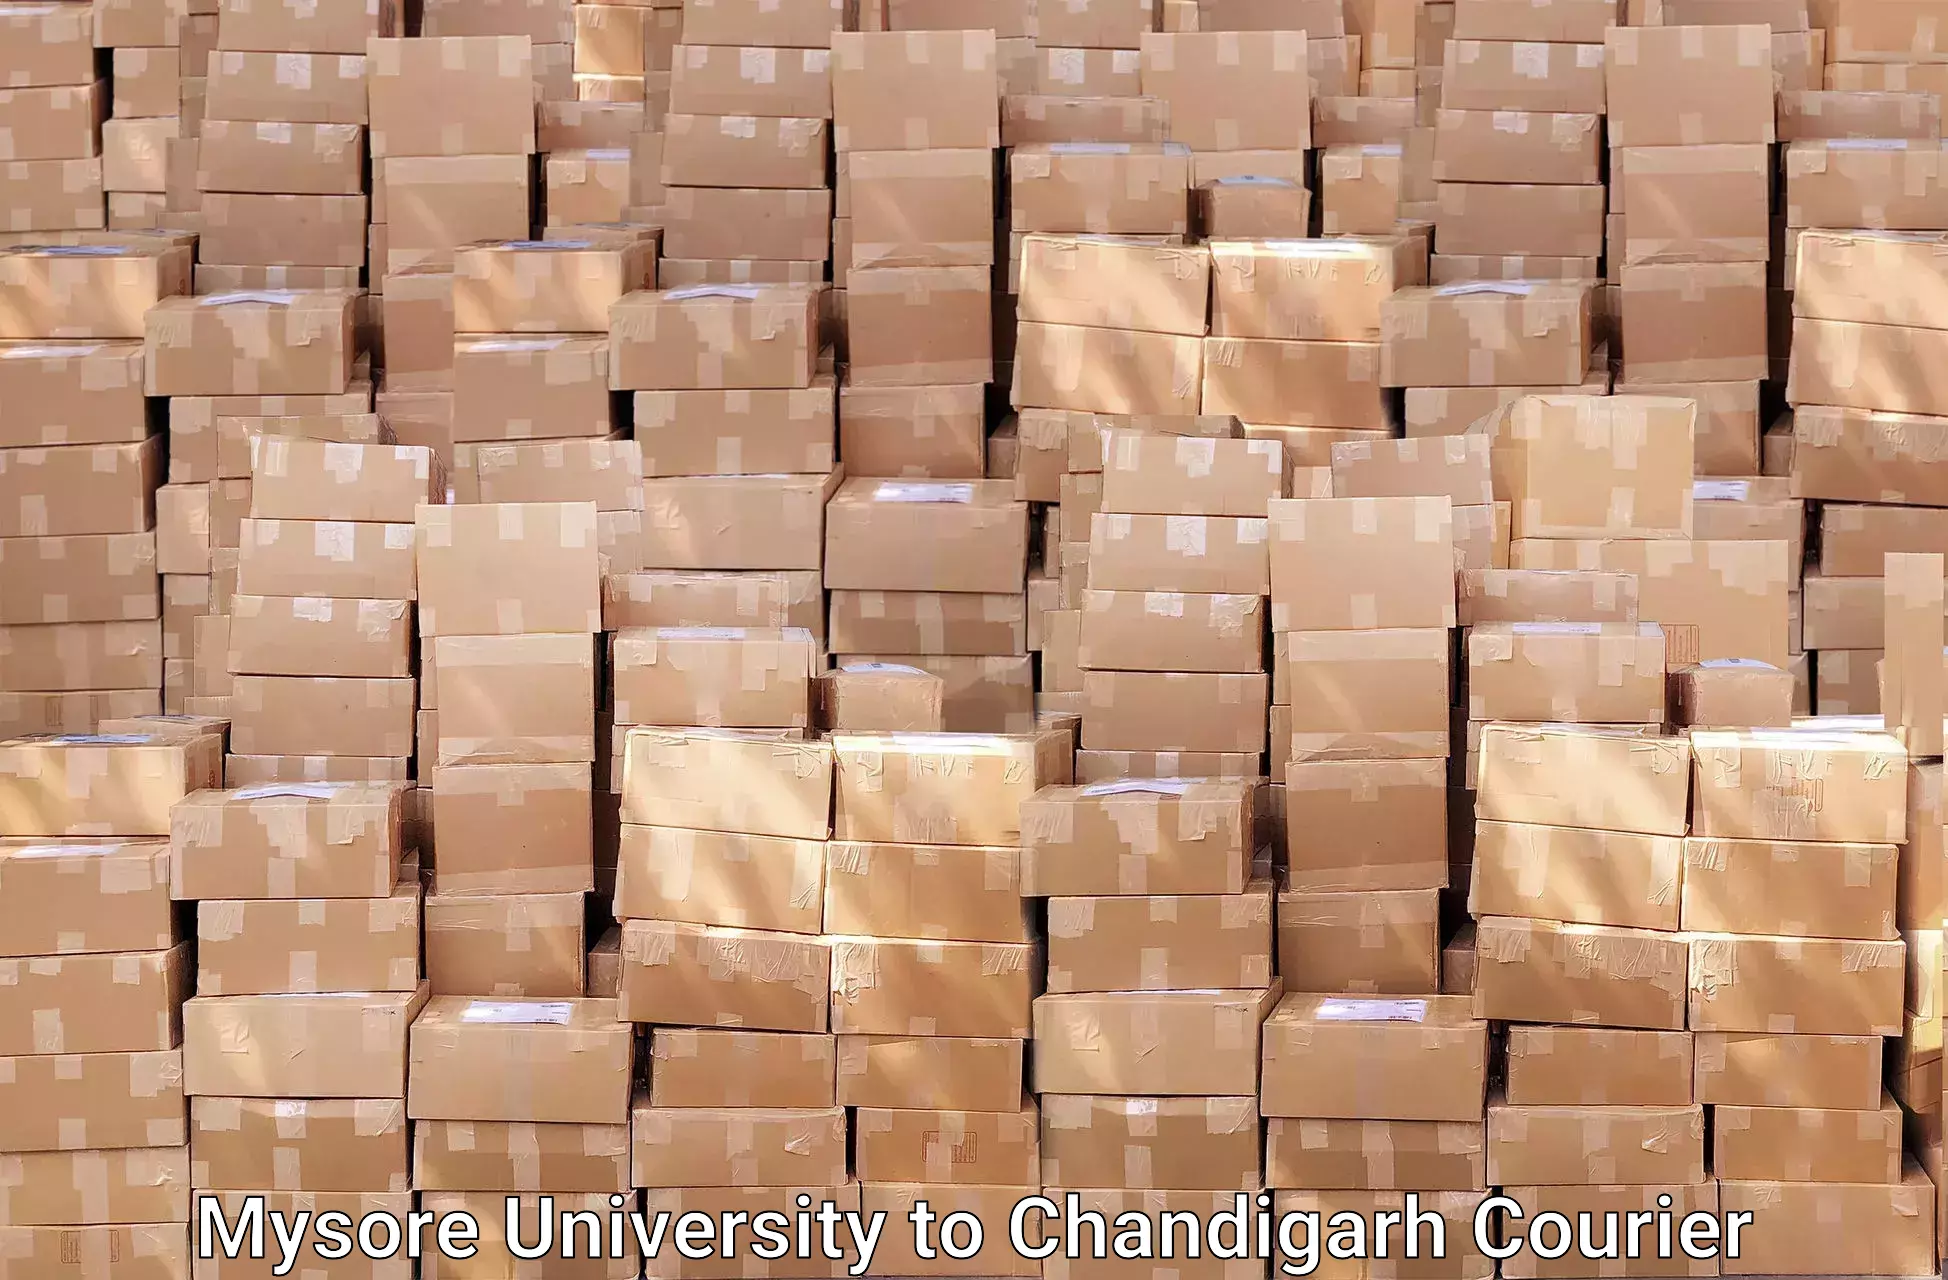 Moving and handling services in Mysore University to Panjab University Chandigarh